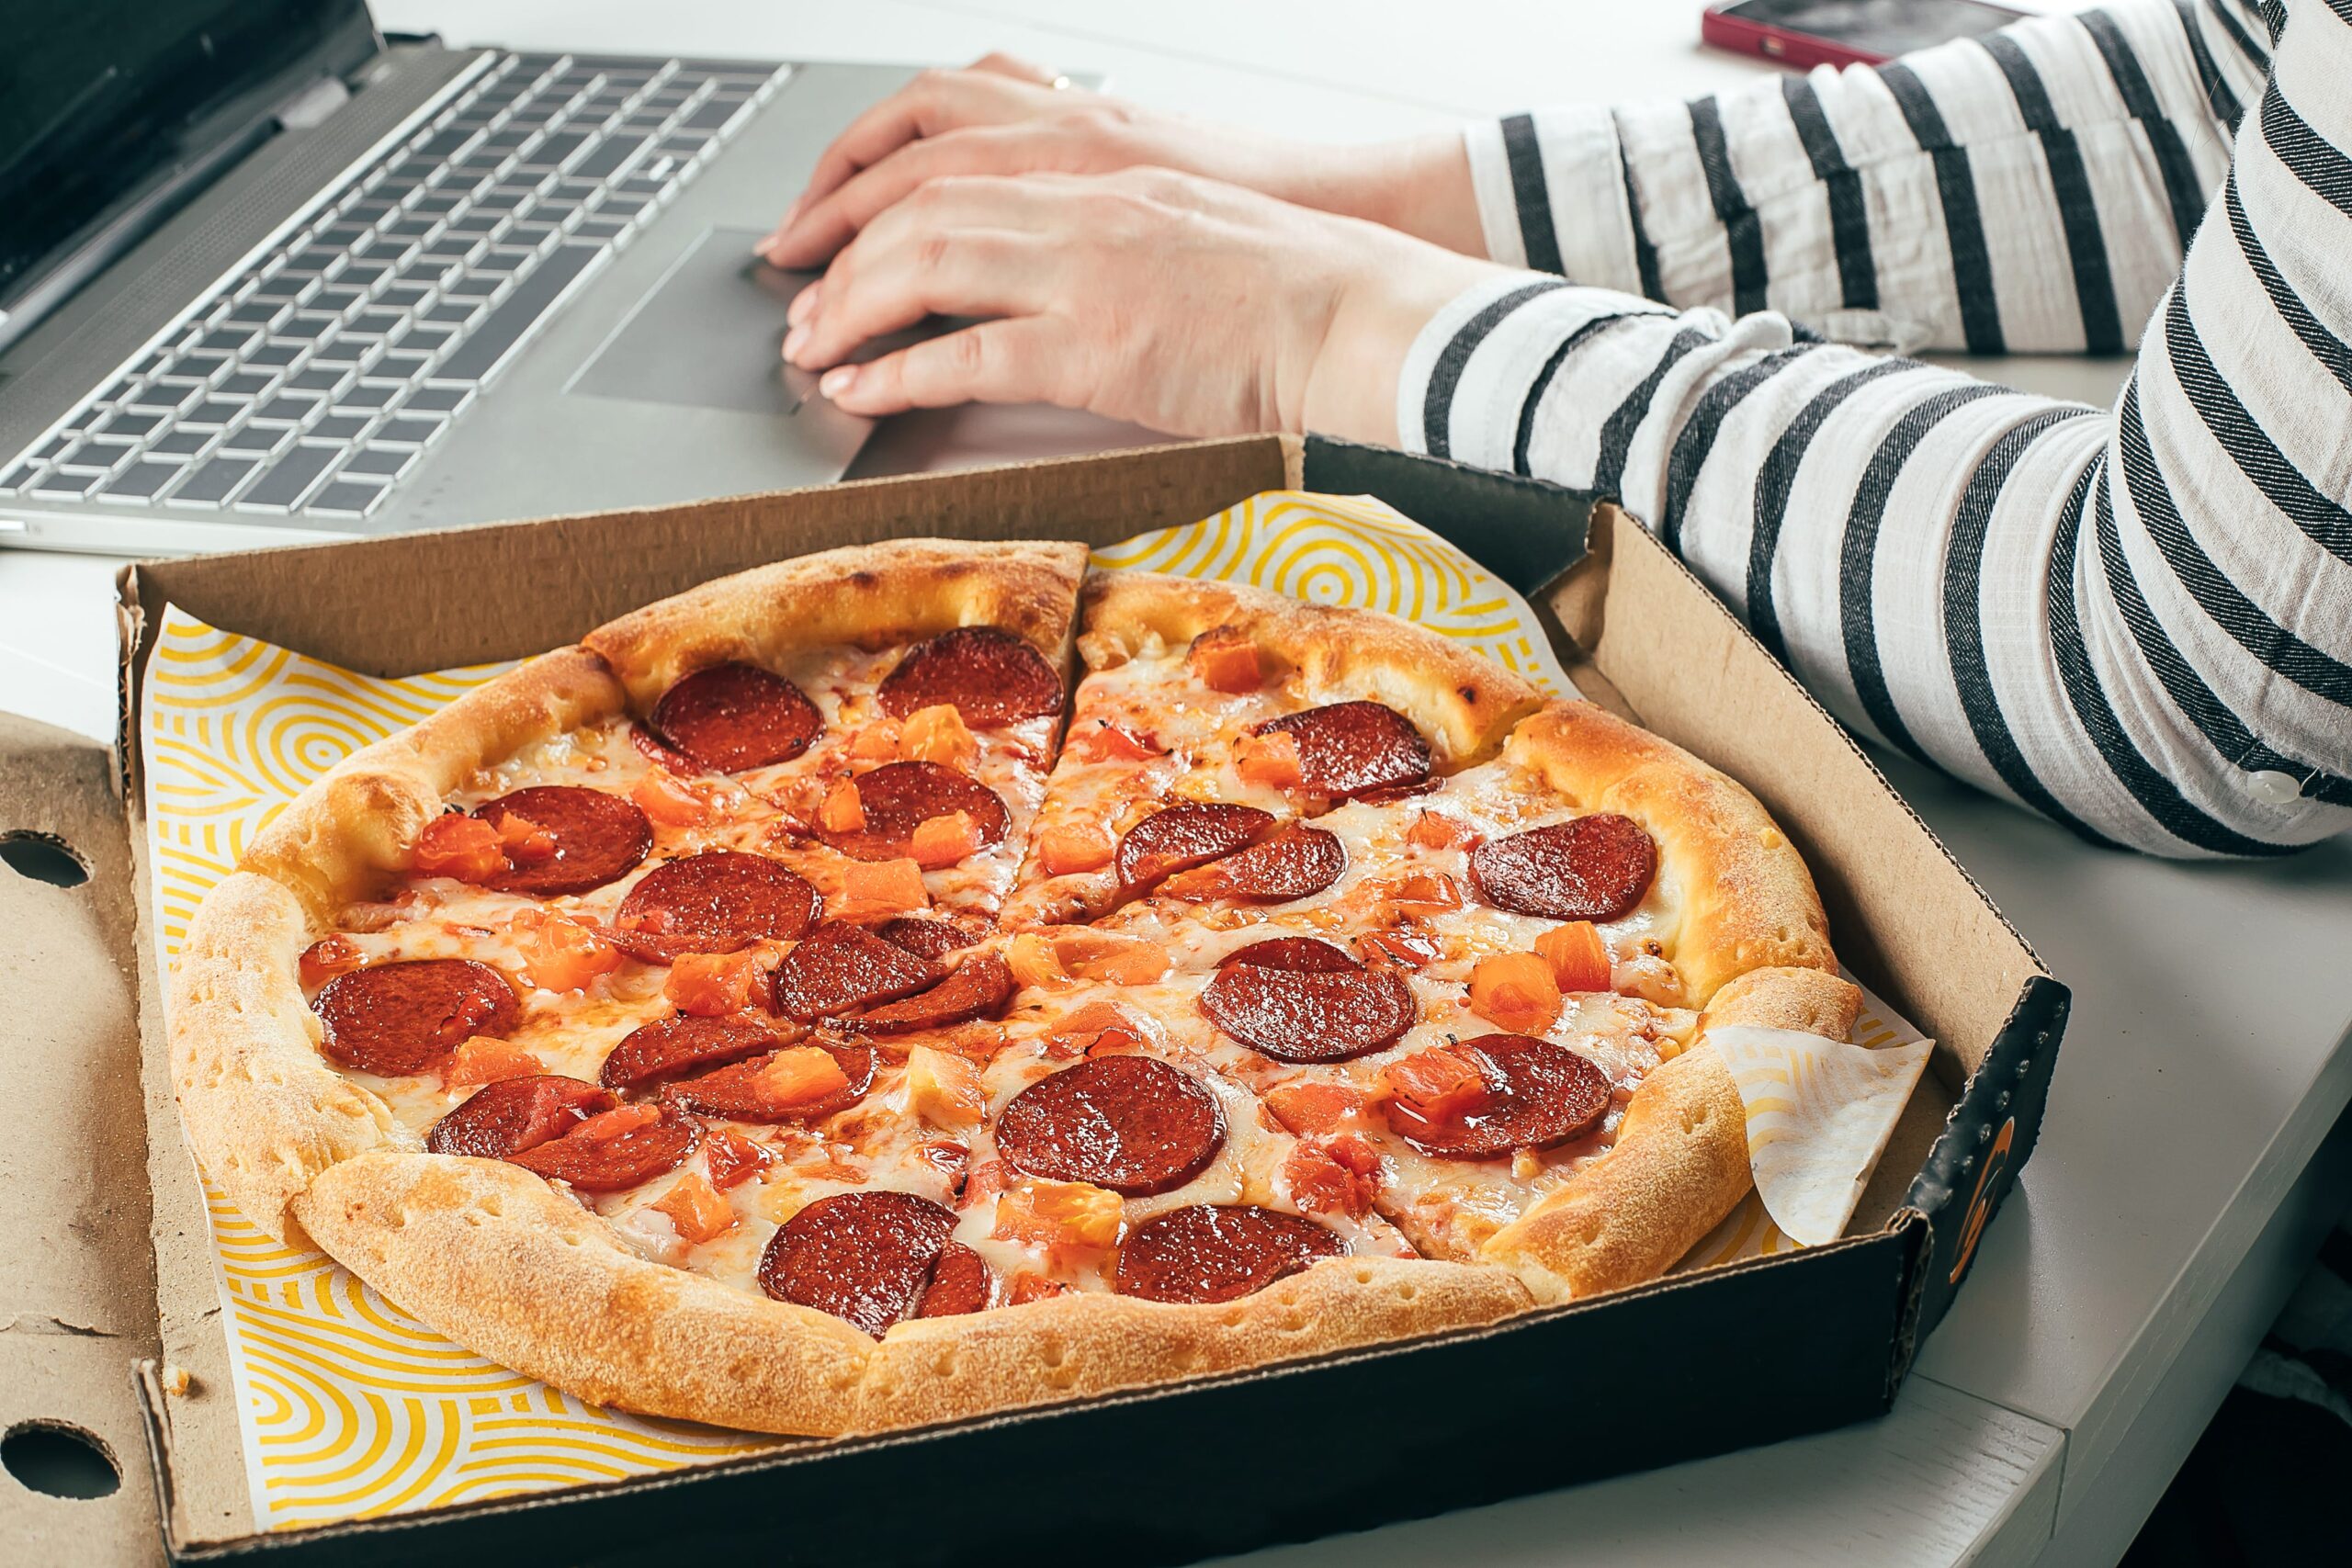 Top 5 Pizza Technology Trends of 2022